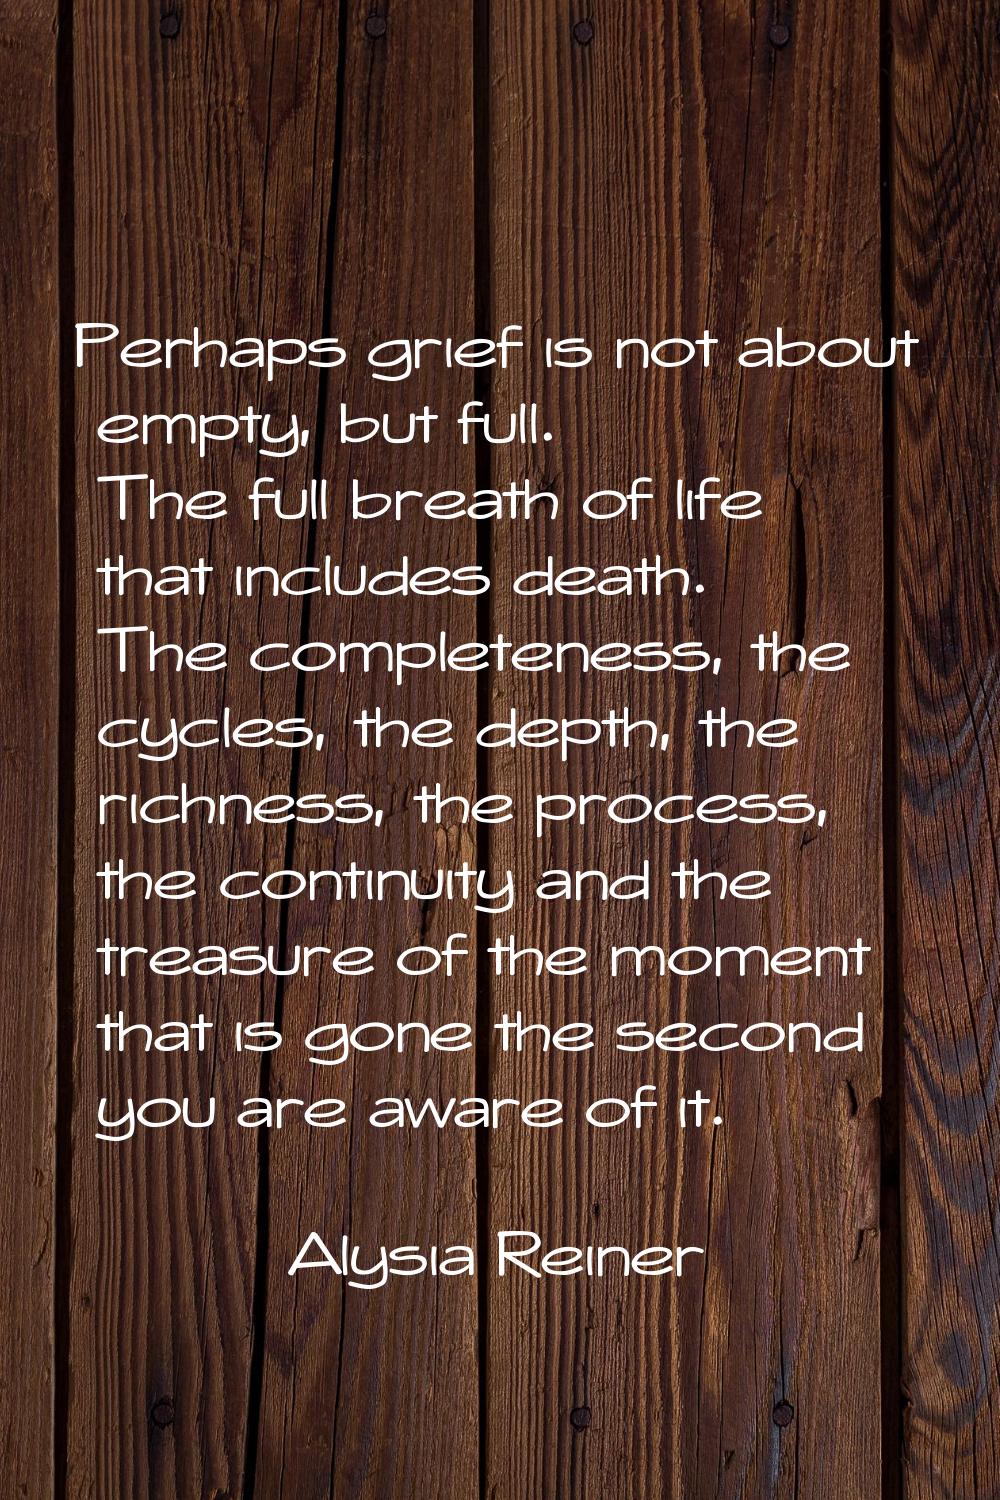 Perhaps grief is not about empty, but full. The full breath of life that includes death. The comple